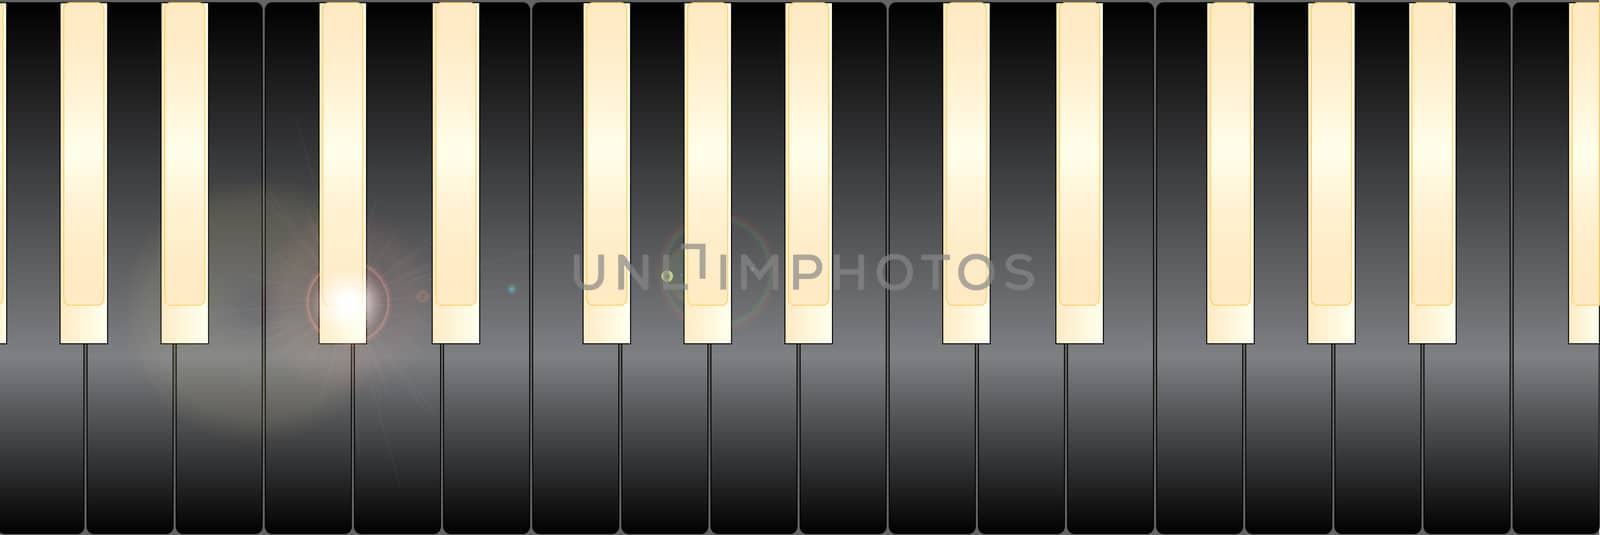 White and Black piano keys with a tint of age